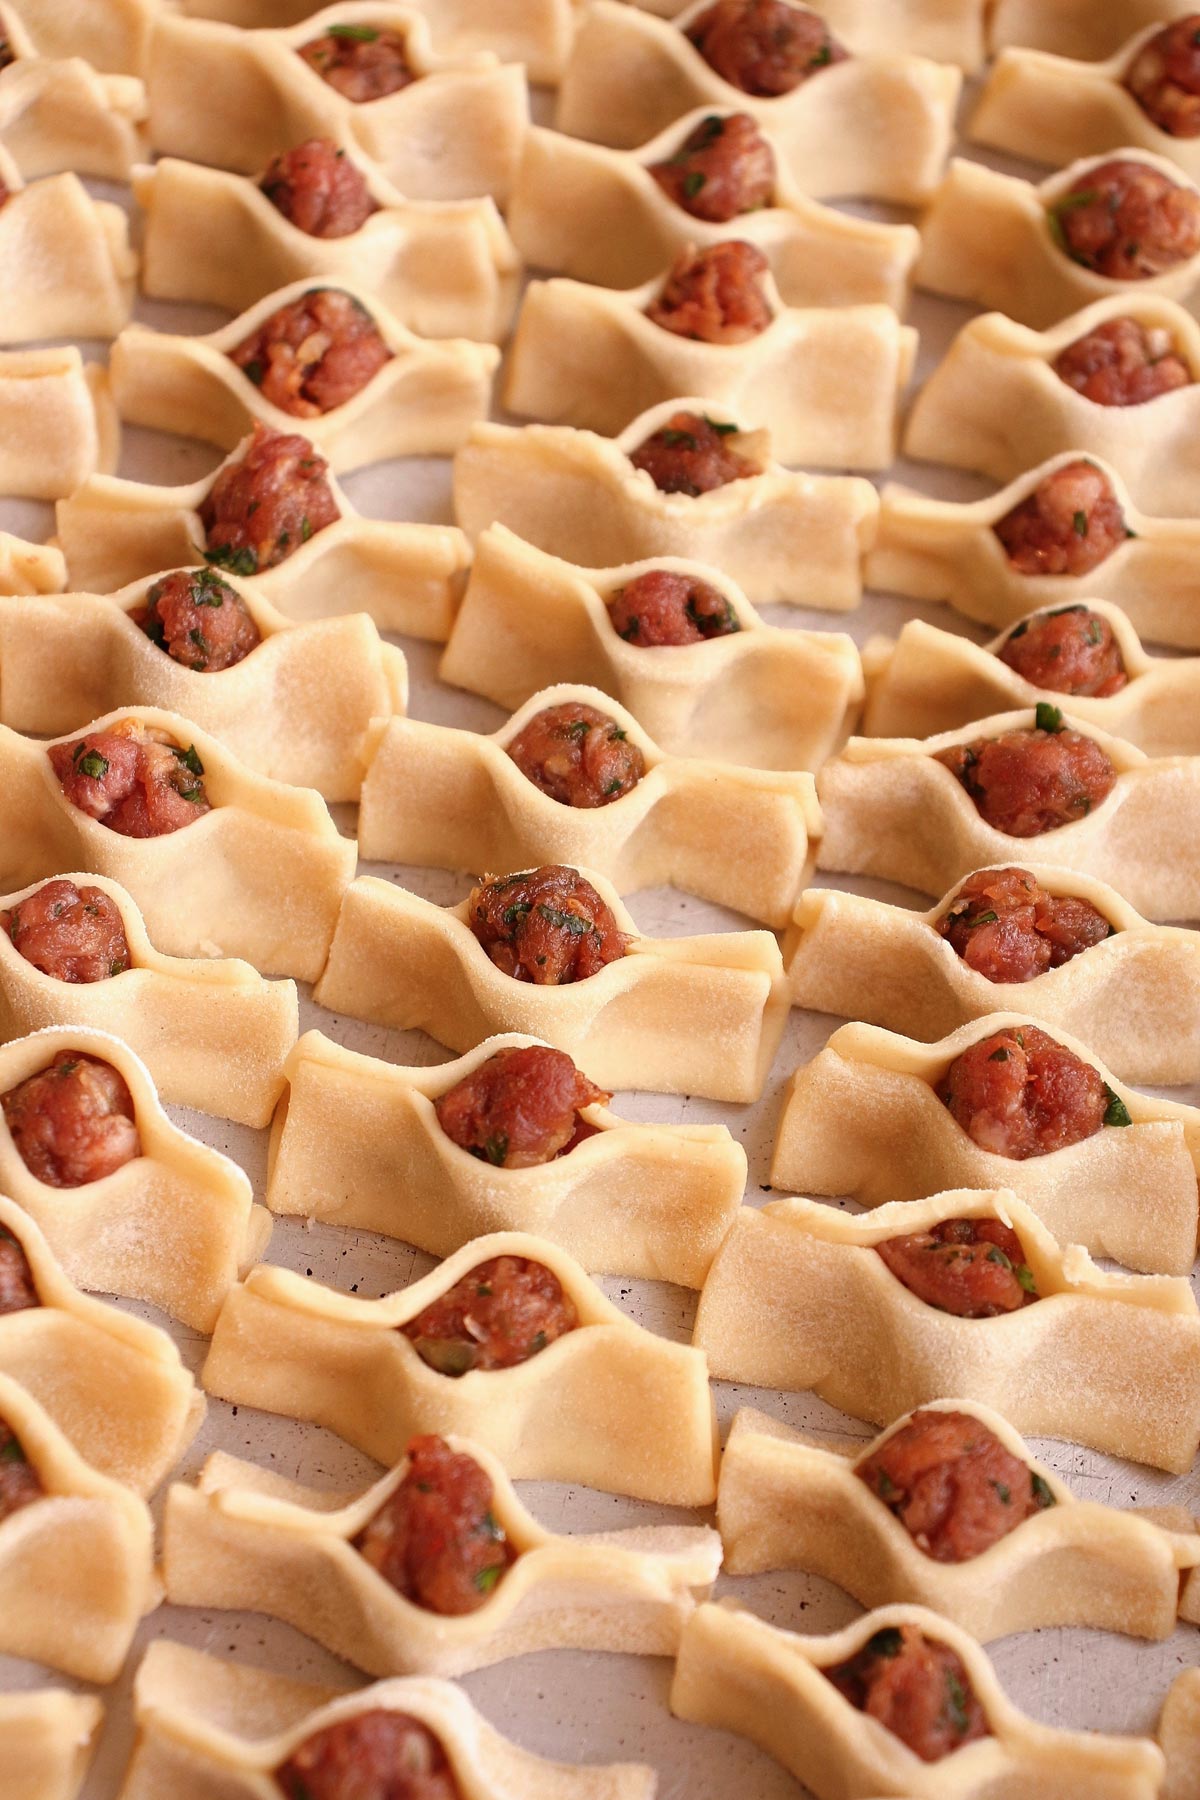 Uncooked Armenian manti arranged in tight rows in a metal pan.